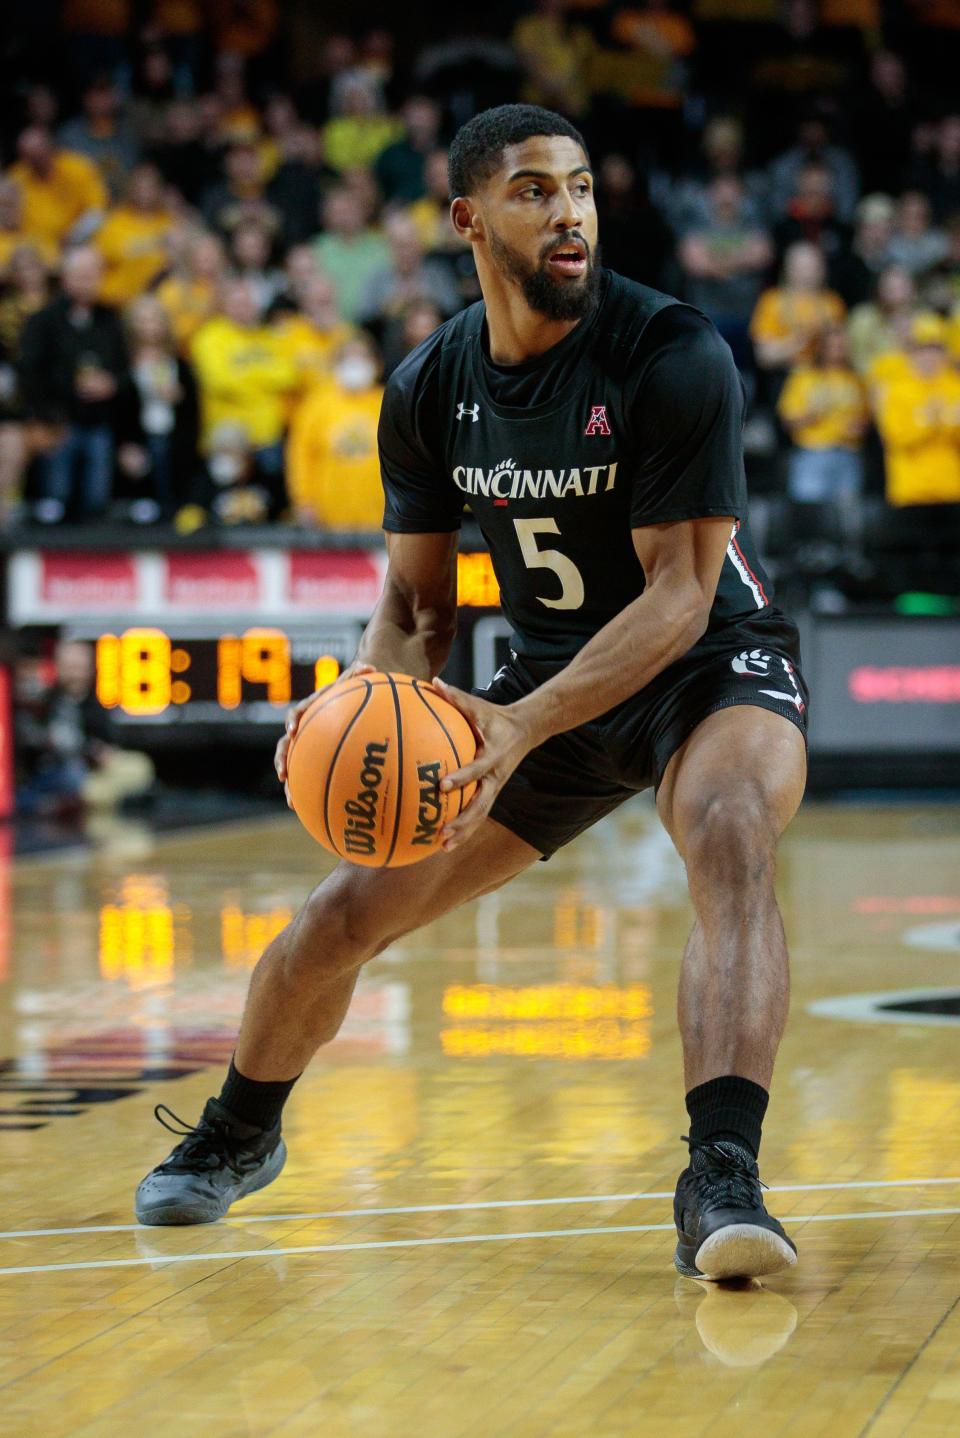 UC's David DeJulius was back in double figures for the Bearcats with 21 points against USF Wednesday night.